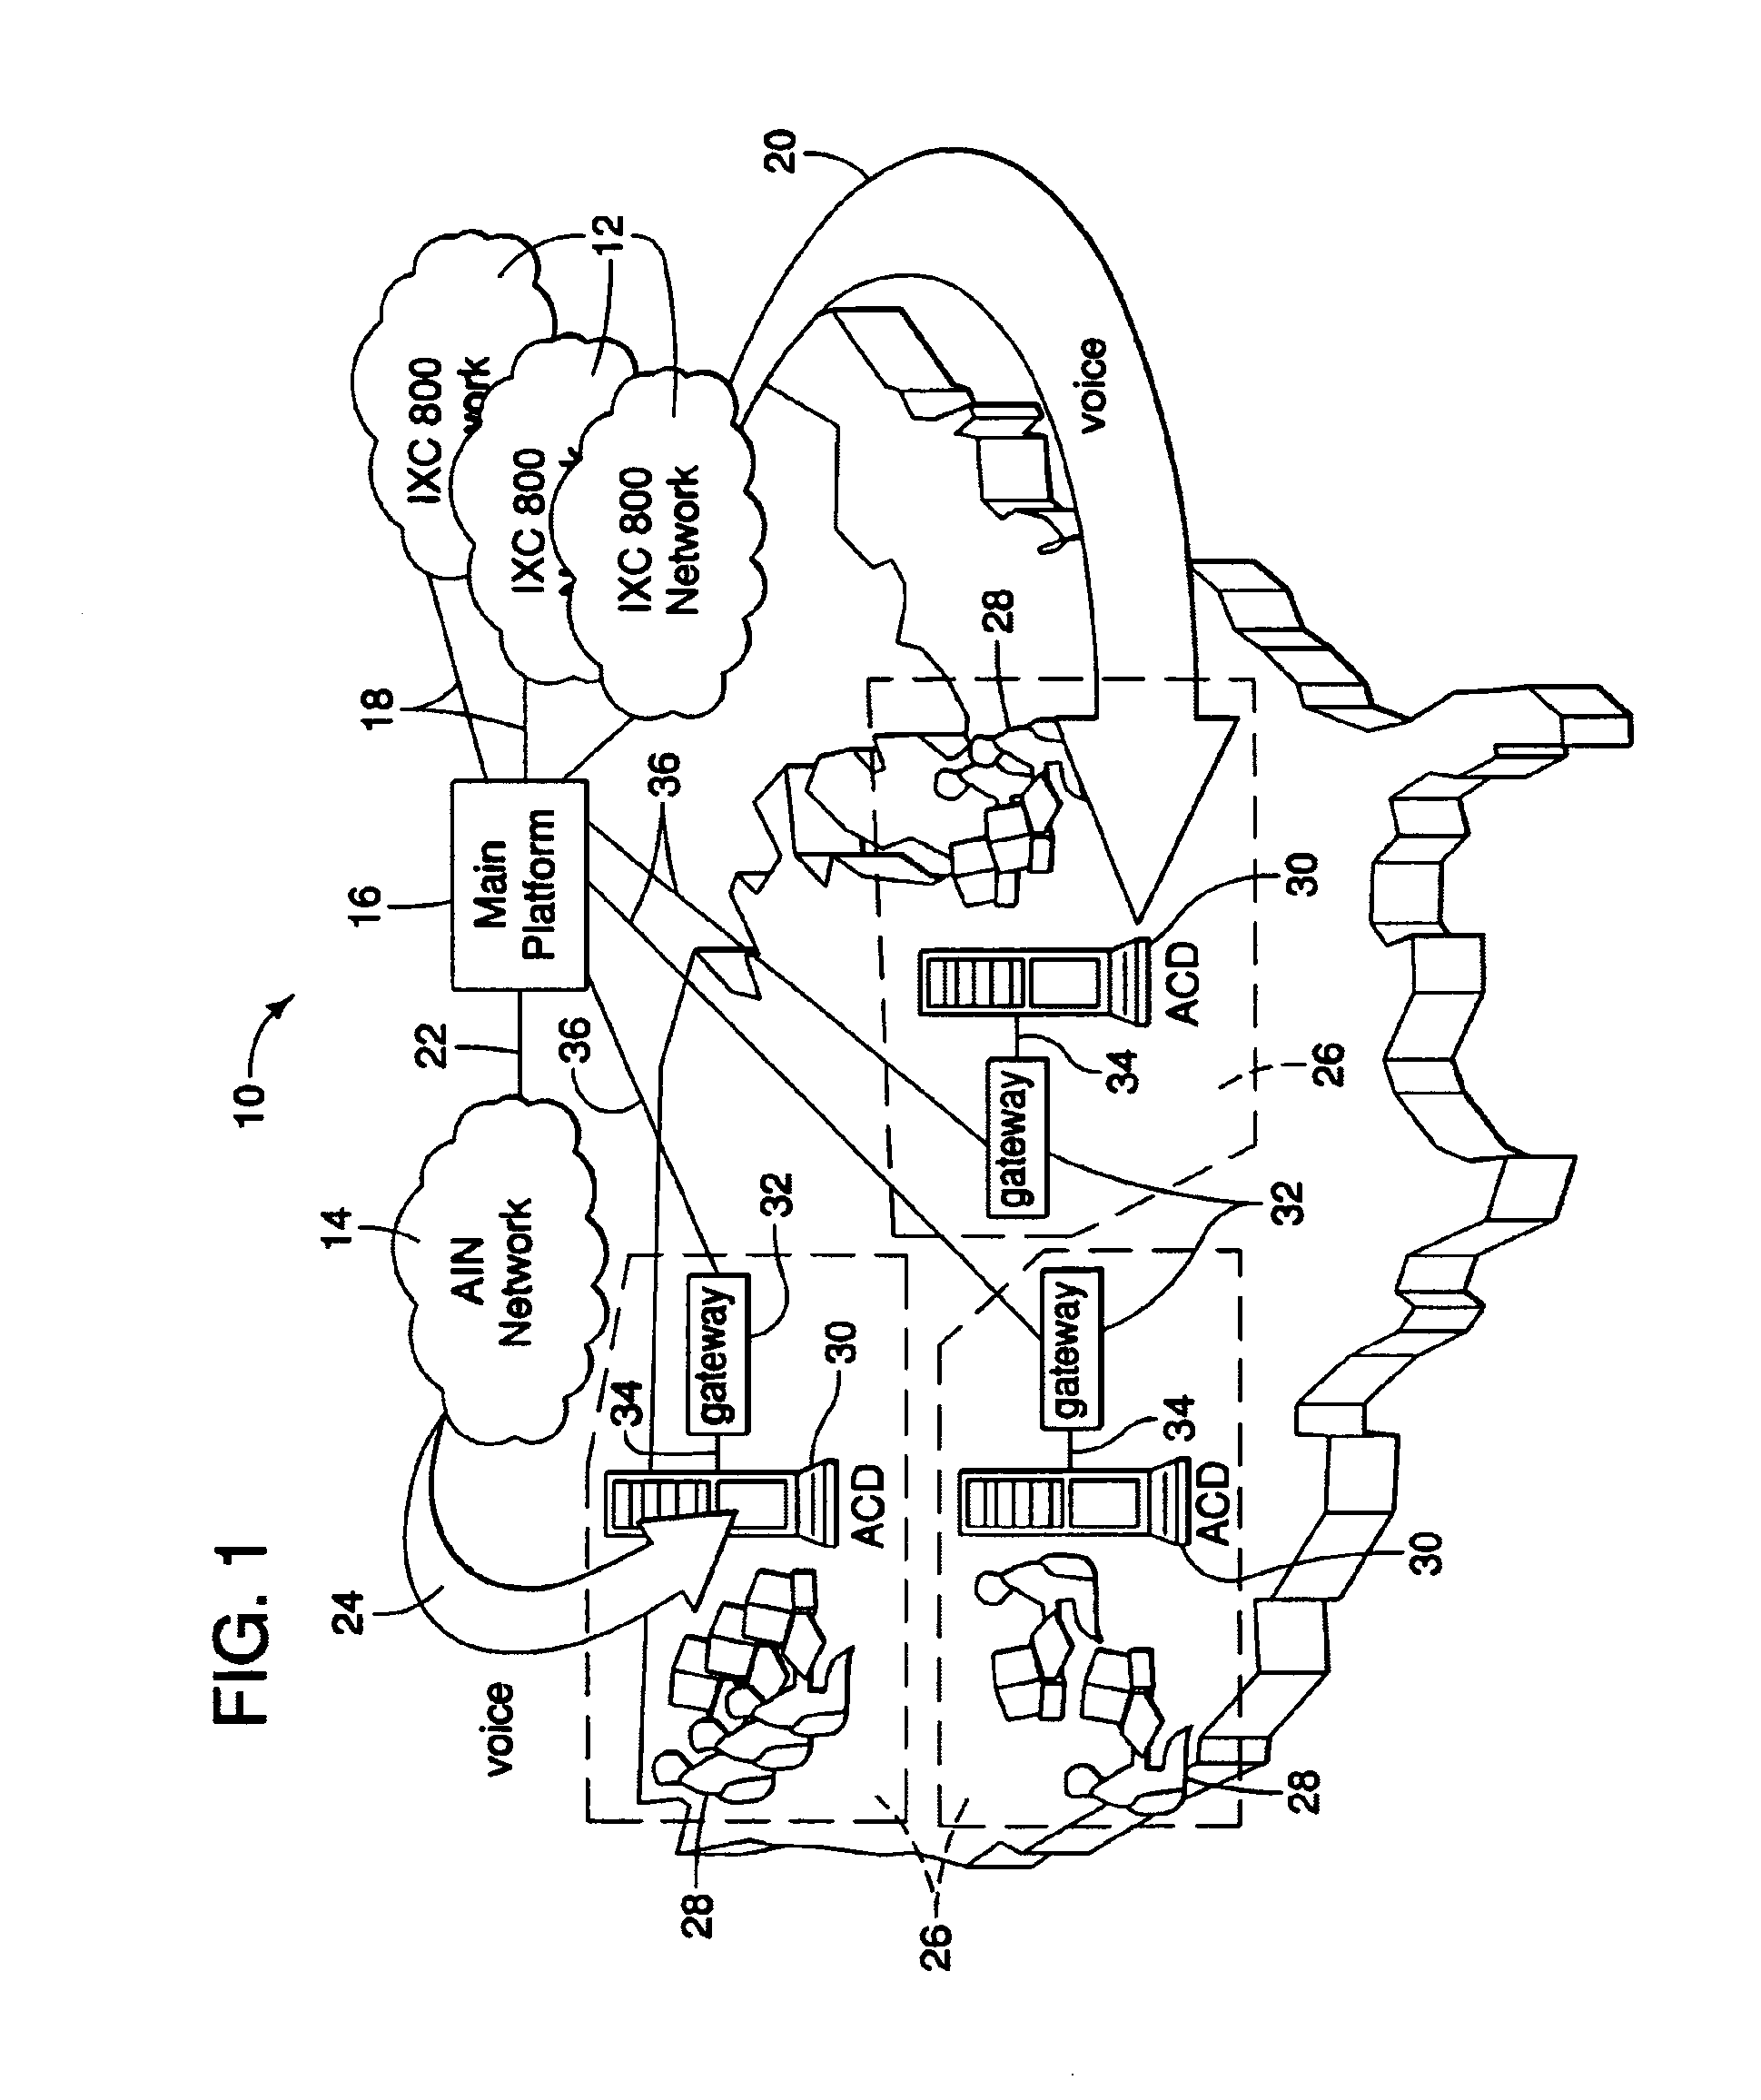 System and method for routing both toll-free and caller-paid telephone calls to call service centers